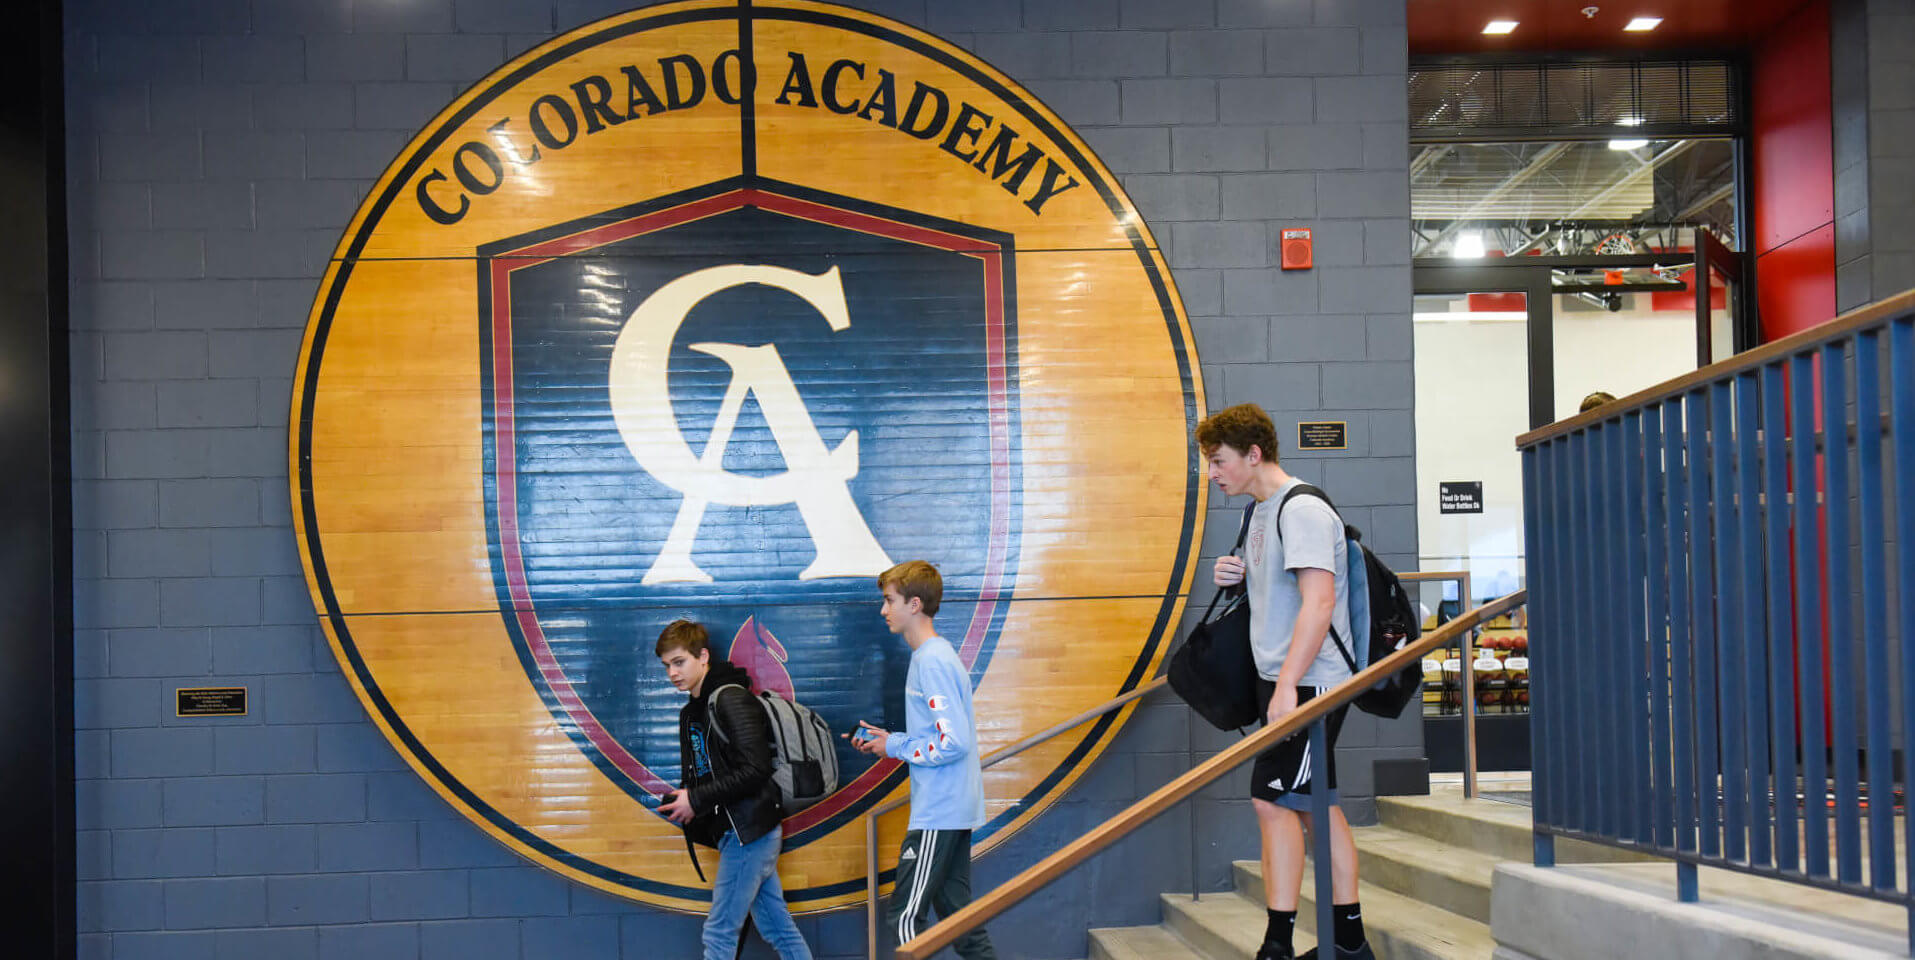 The new Athletic Center at Colorado Academy